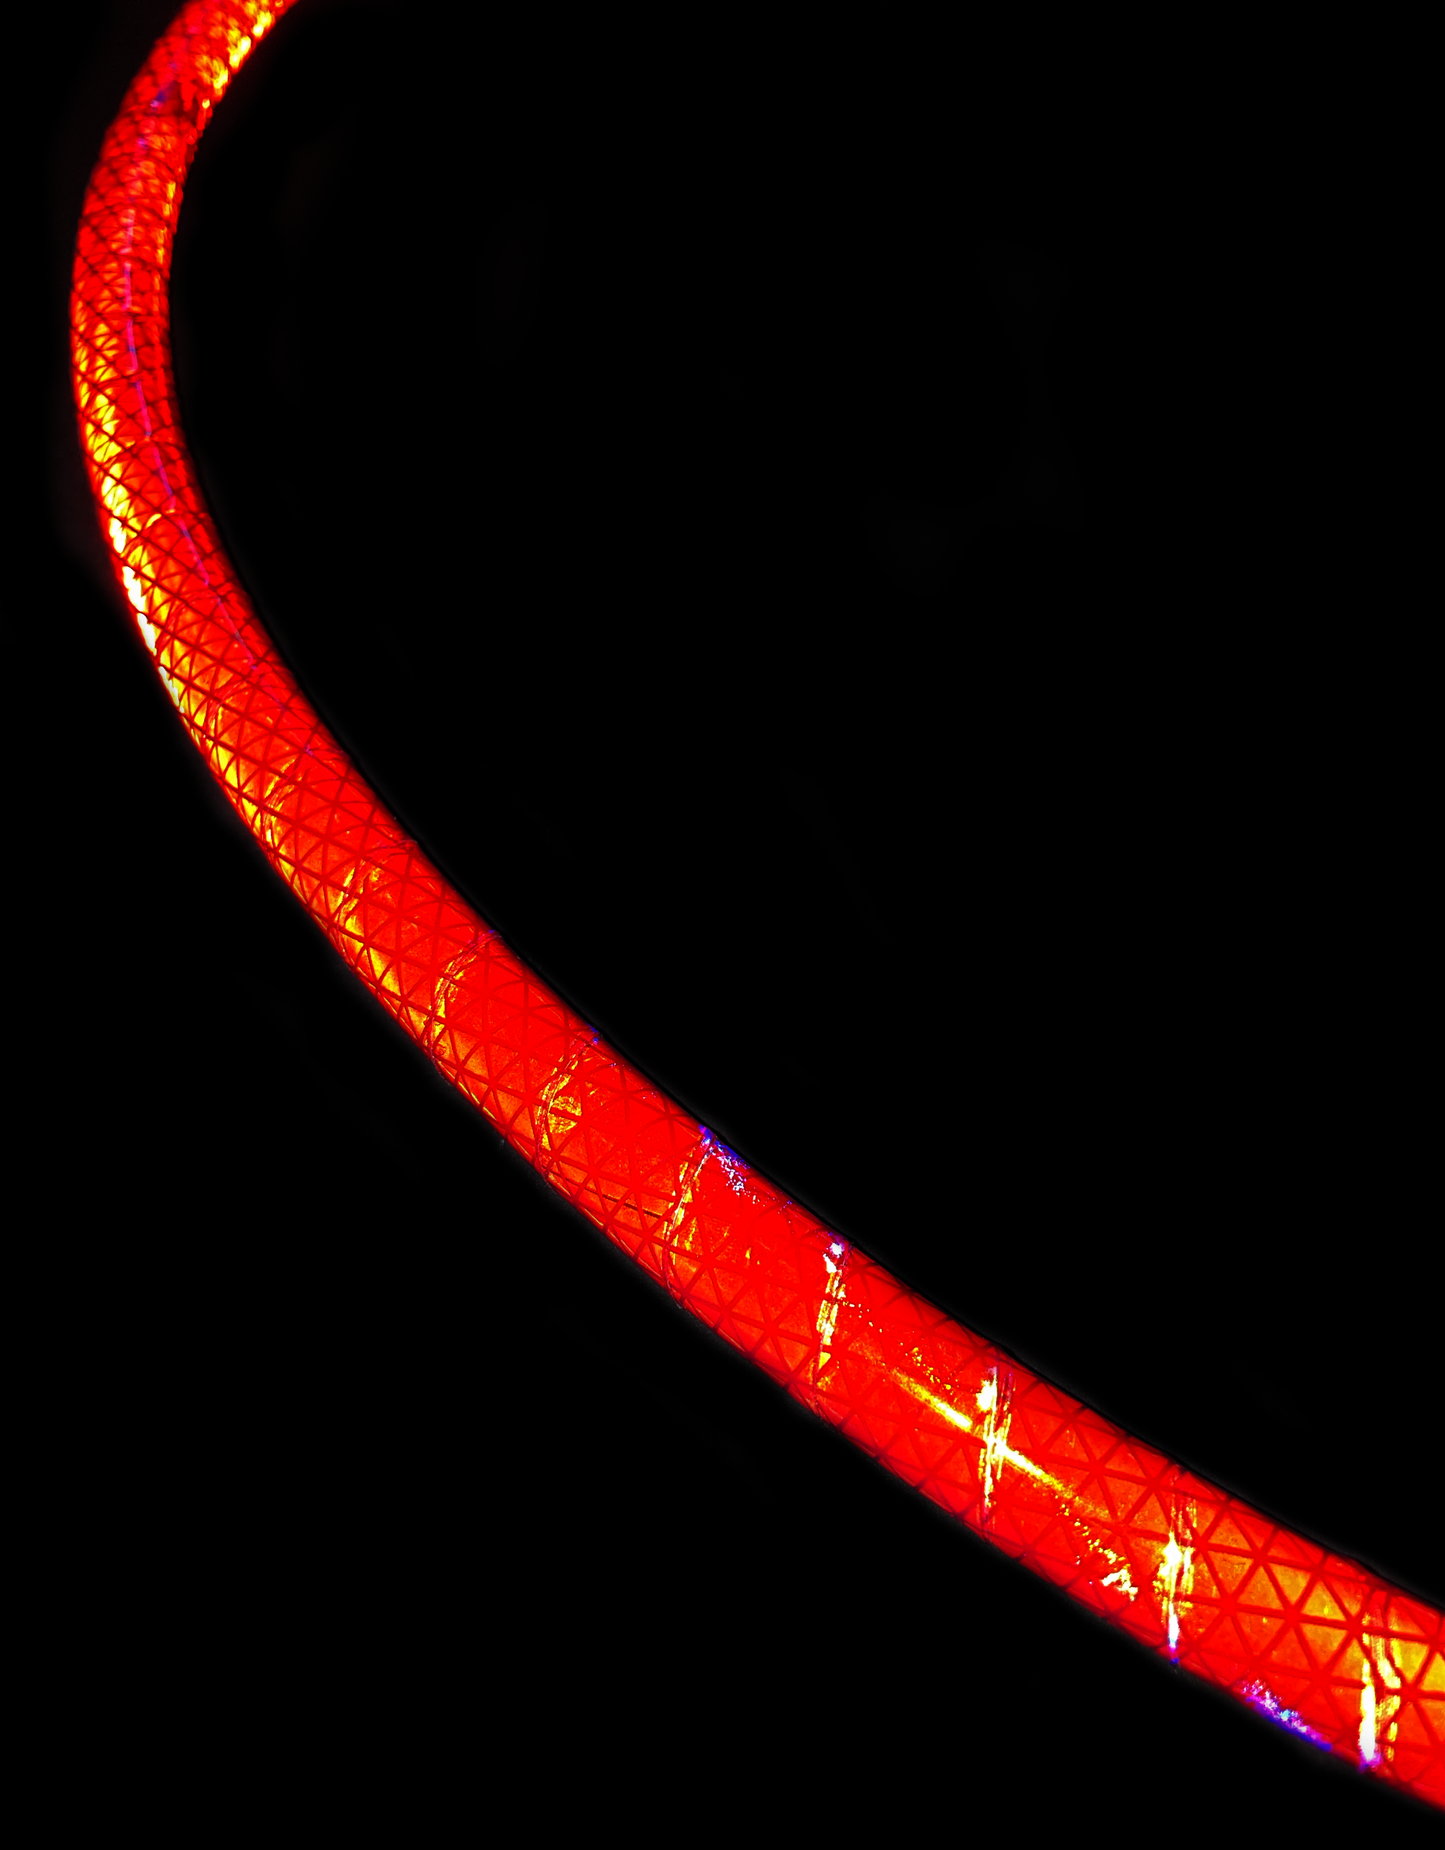 Fire Red Opalescent Color-Shift Reflective Taped Hoops